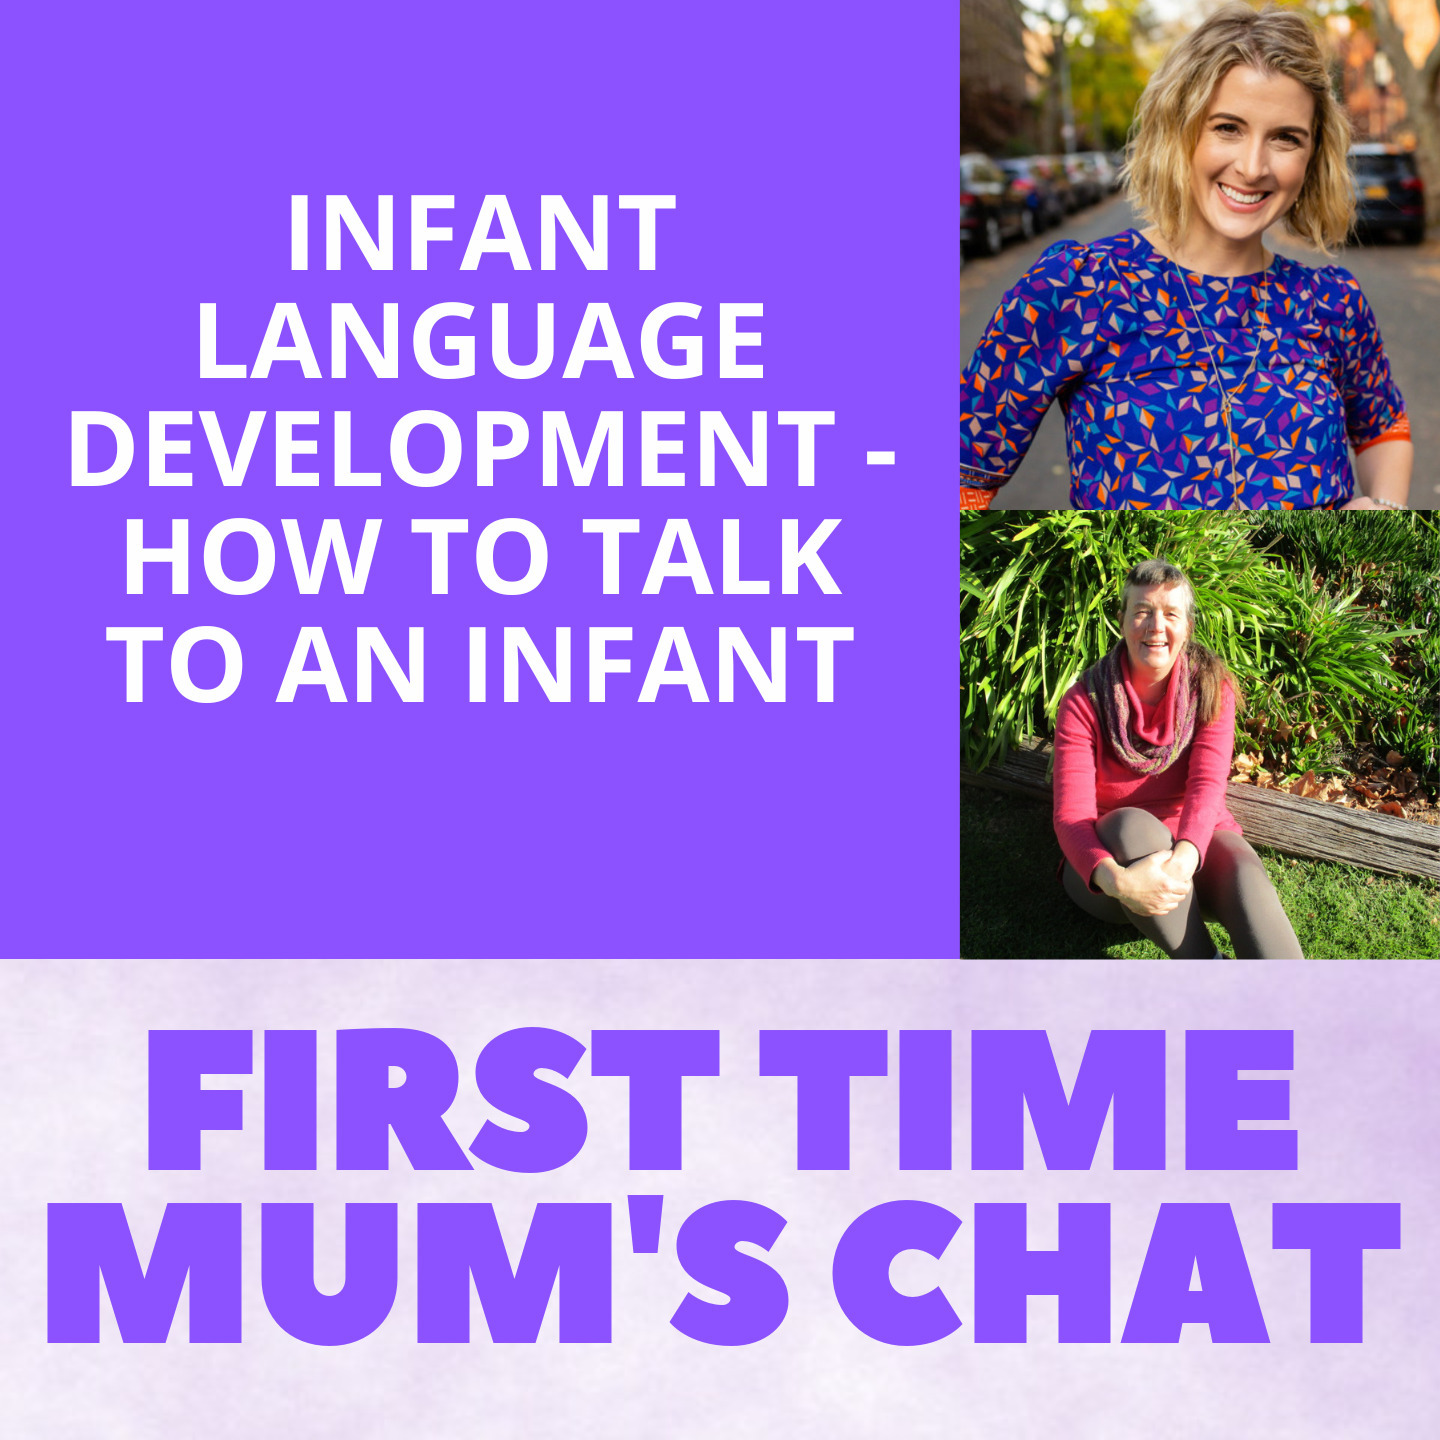 Infant Language Development - How to Talk to an Infant